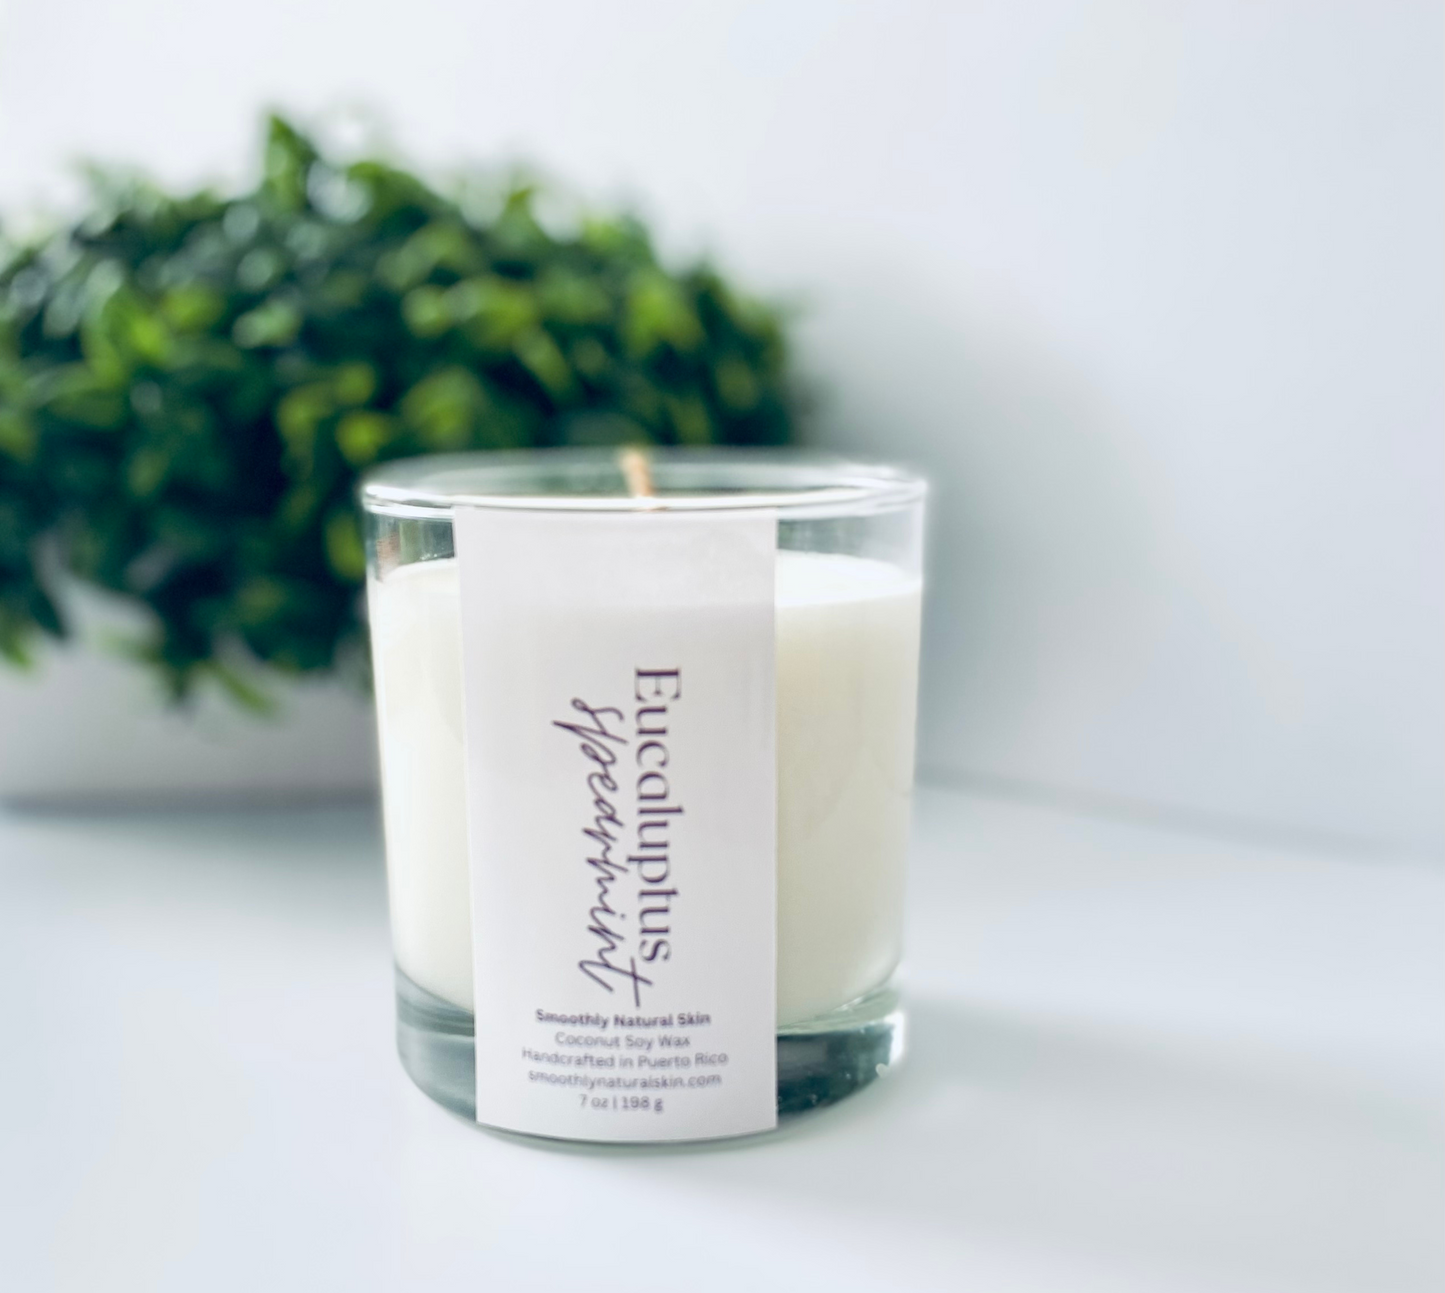 Eucalyptus + Spearmint Candles has a blend of eucalyptus and spearmint with fresh citrus lemon, lavender flowers, and a hint of sage. A Best Seller!